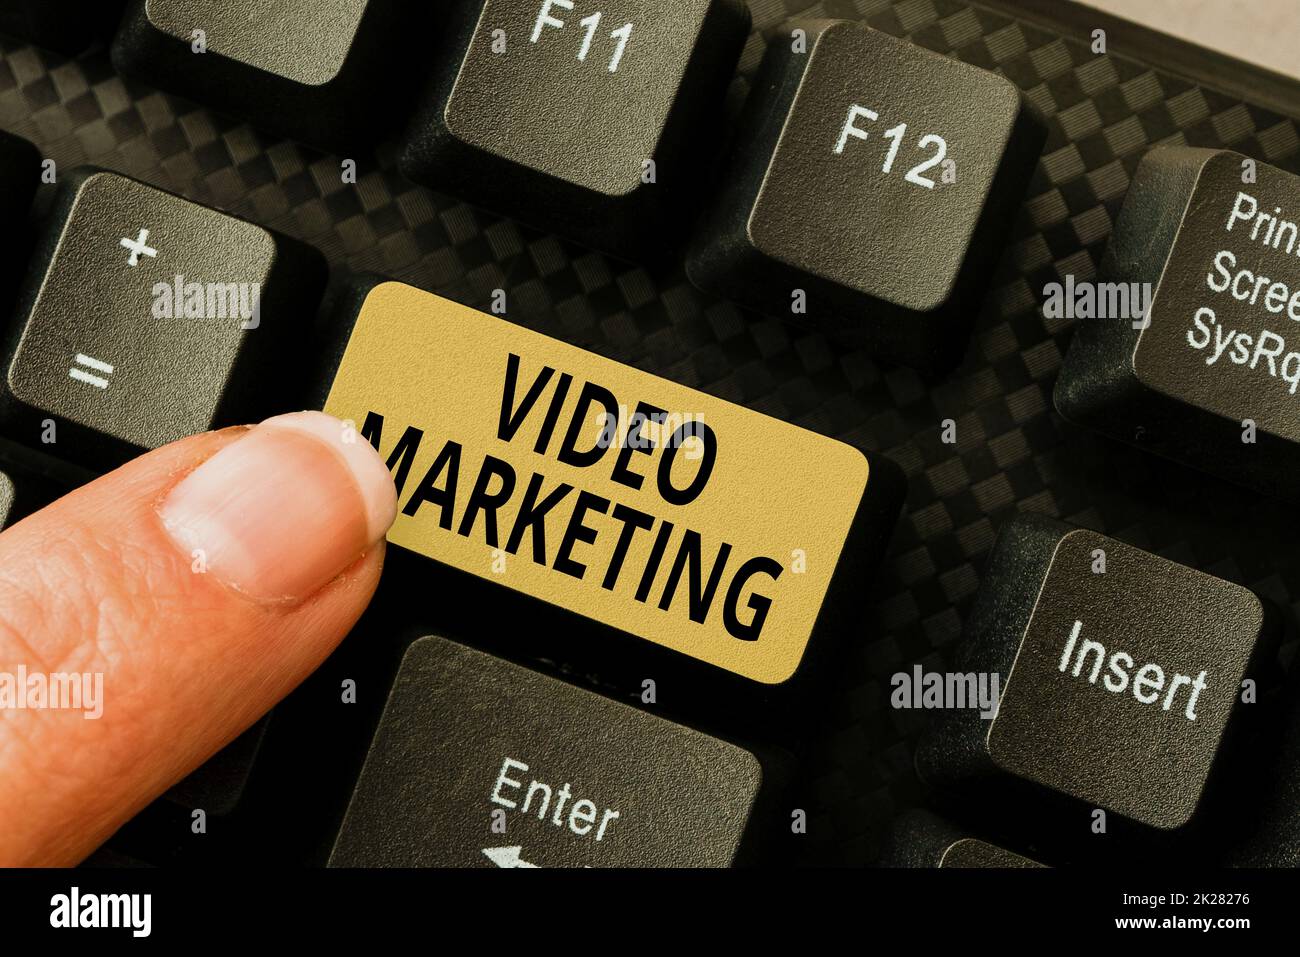 Text caption presenting Video Marketing. Business approach using videos to promote and market your product or service Browsing Online Transaction History, Creating Organized File System Stock Photo